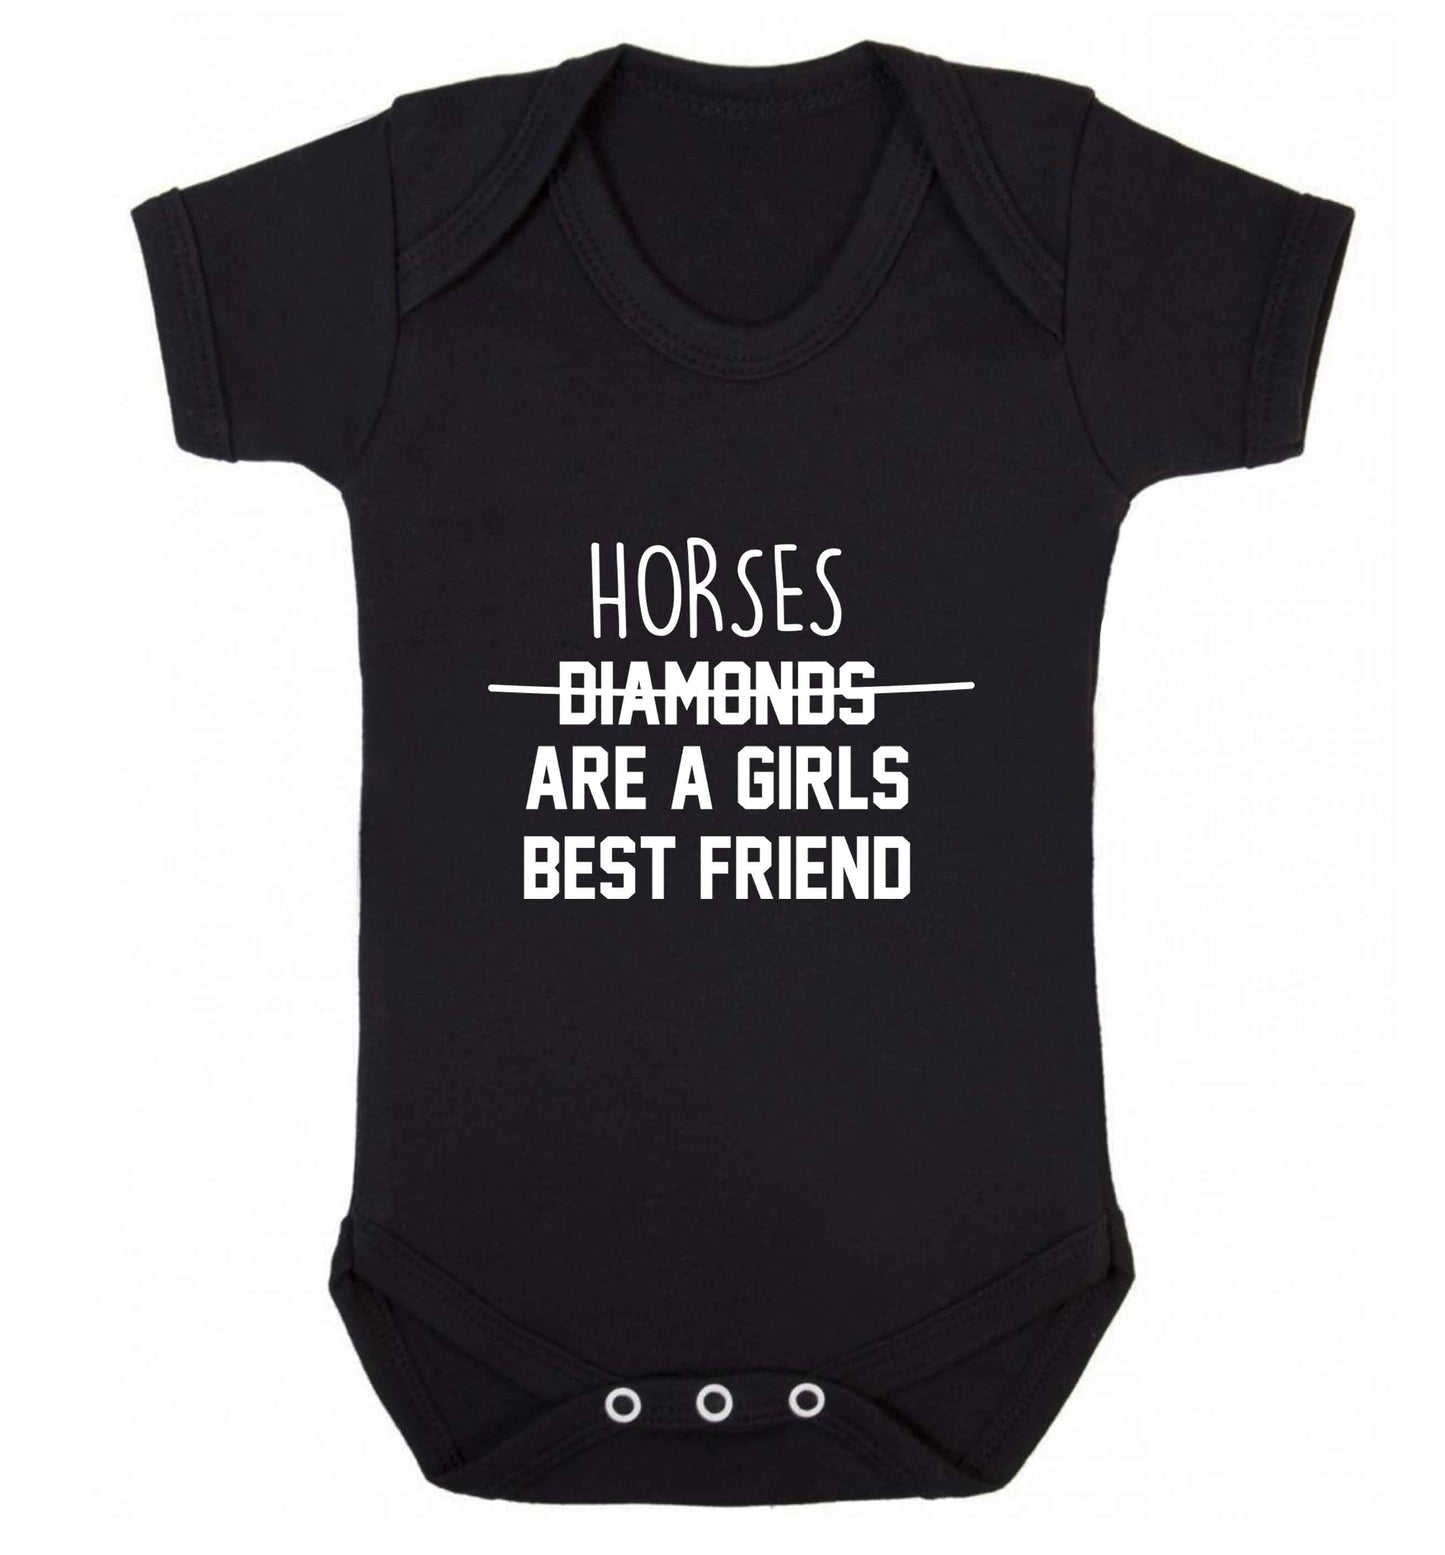 Horses are a girls best friend baby vest black 18-24 months